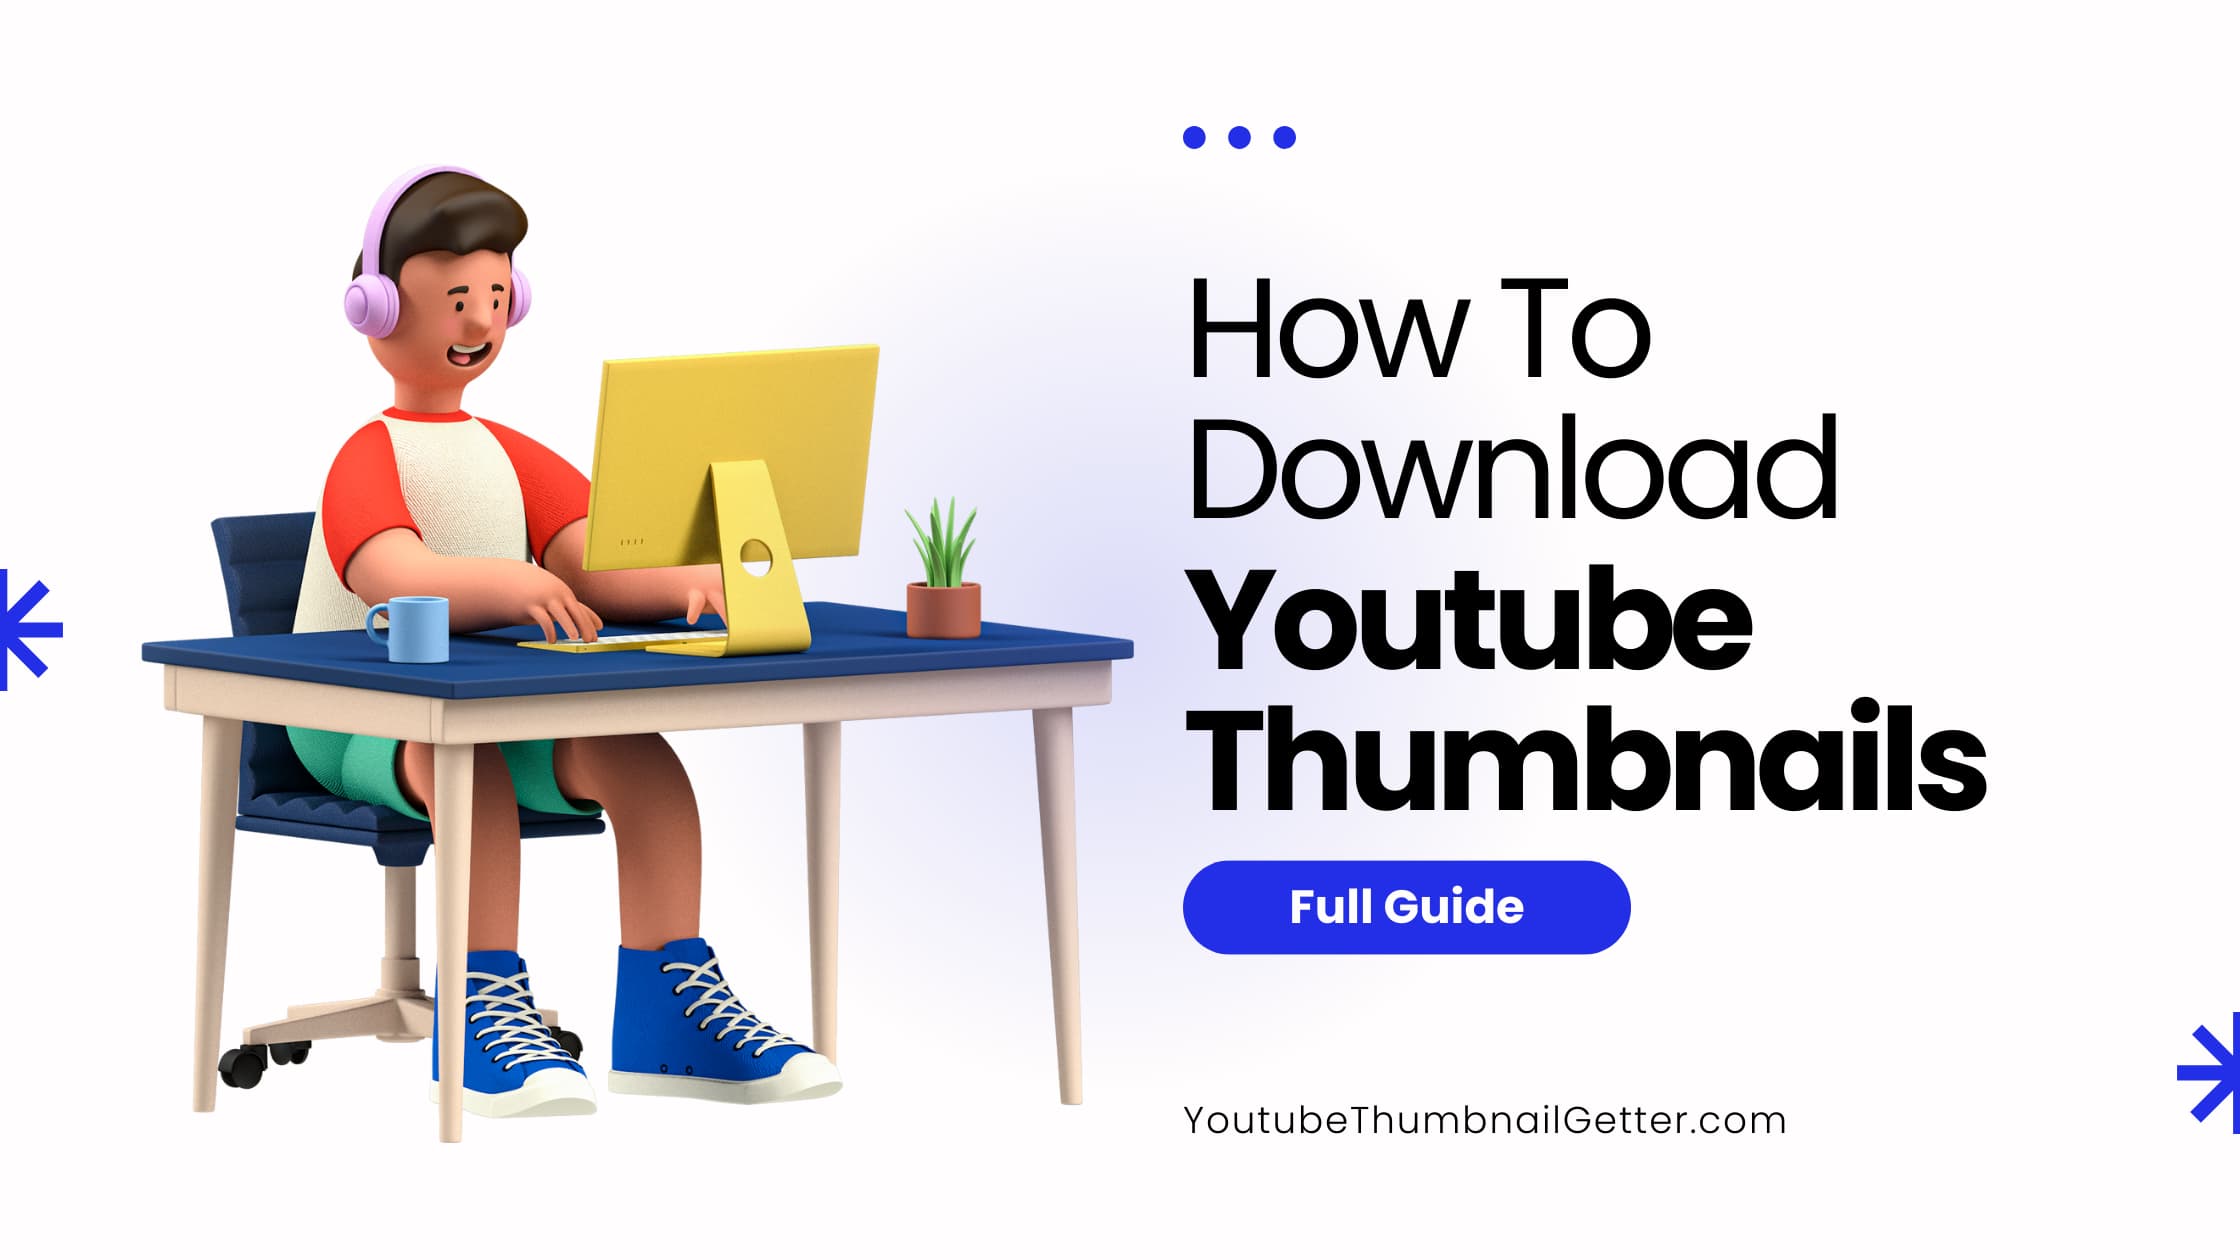 How to Download YouTube Thumbnails - Full Guide